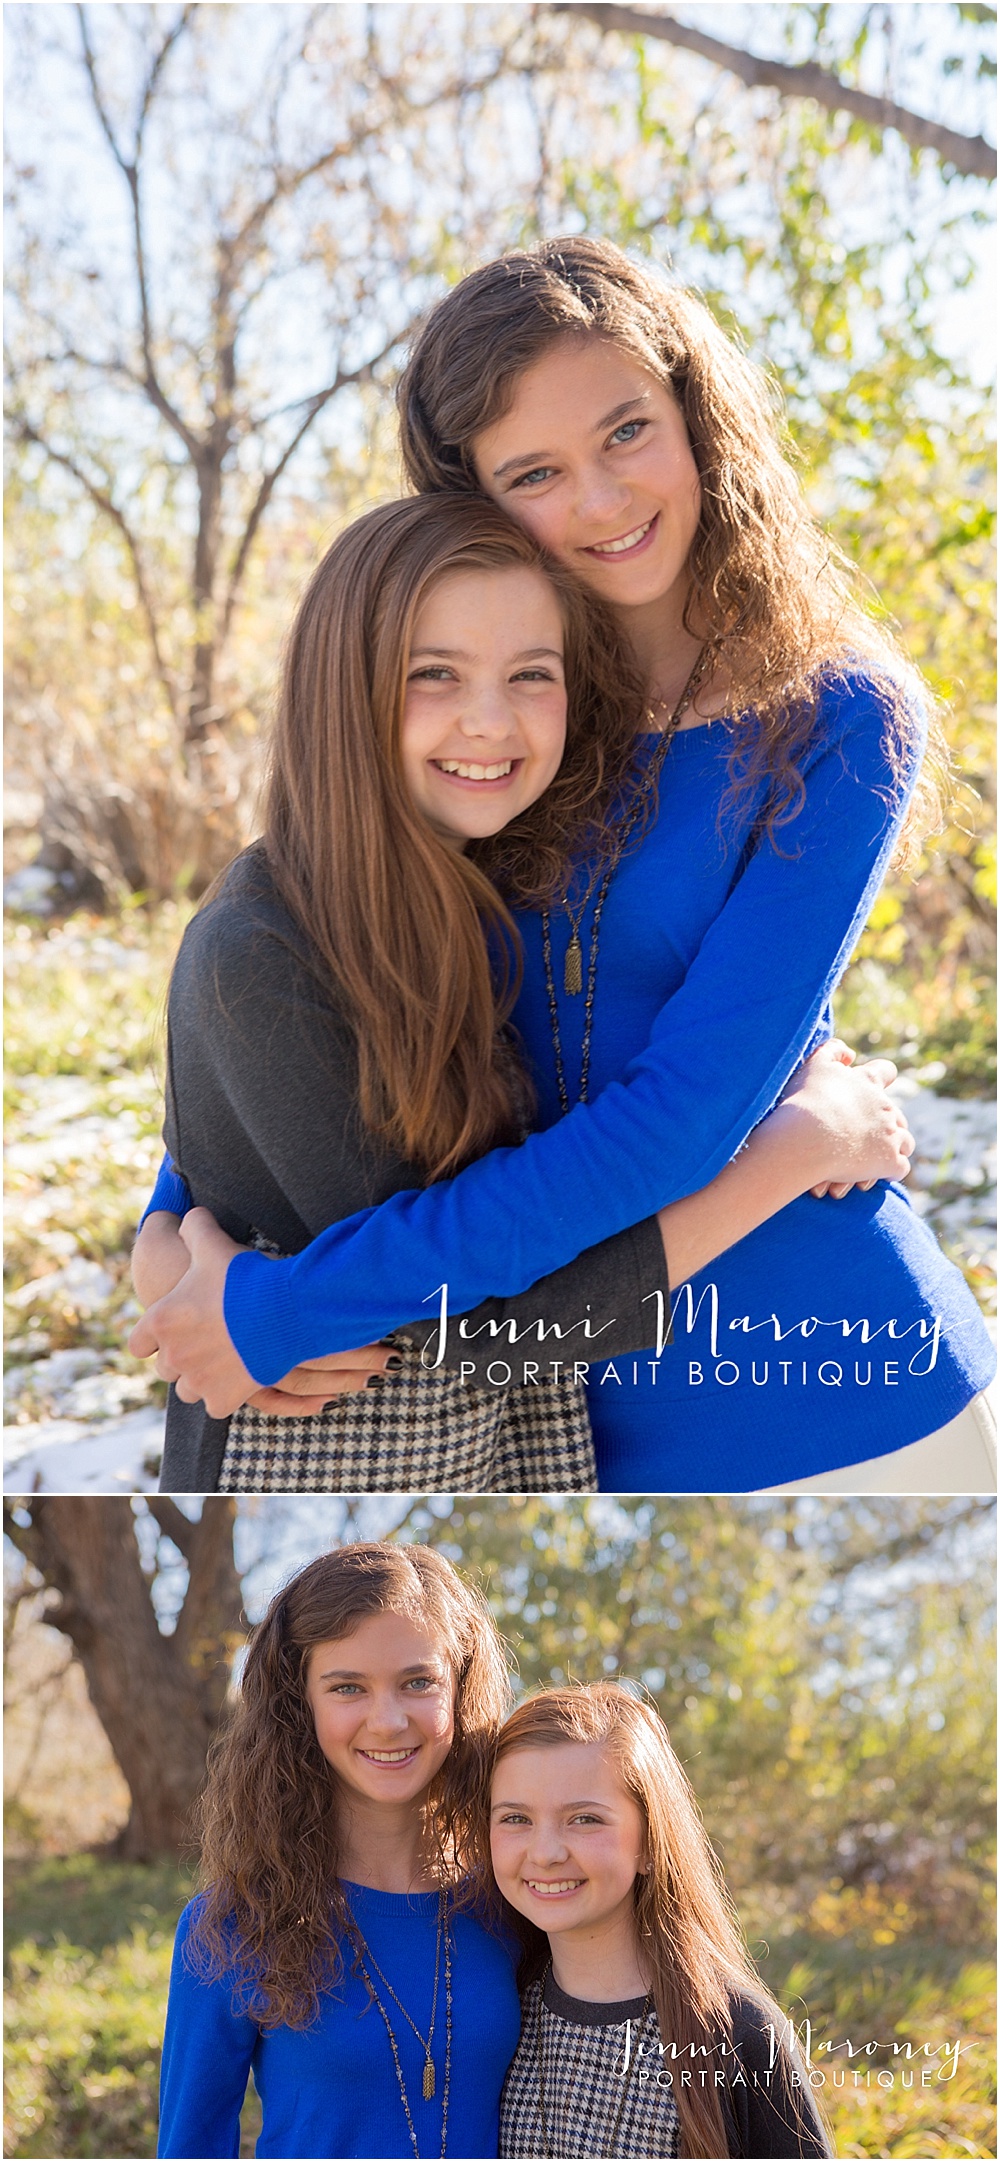 Boulder family photographer, Jenni Maroney specializes in outdoor, natural Boulder family portraits. 